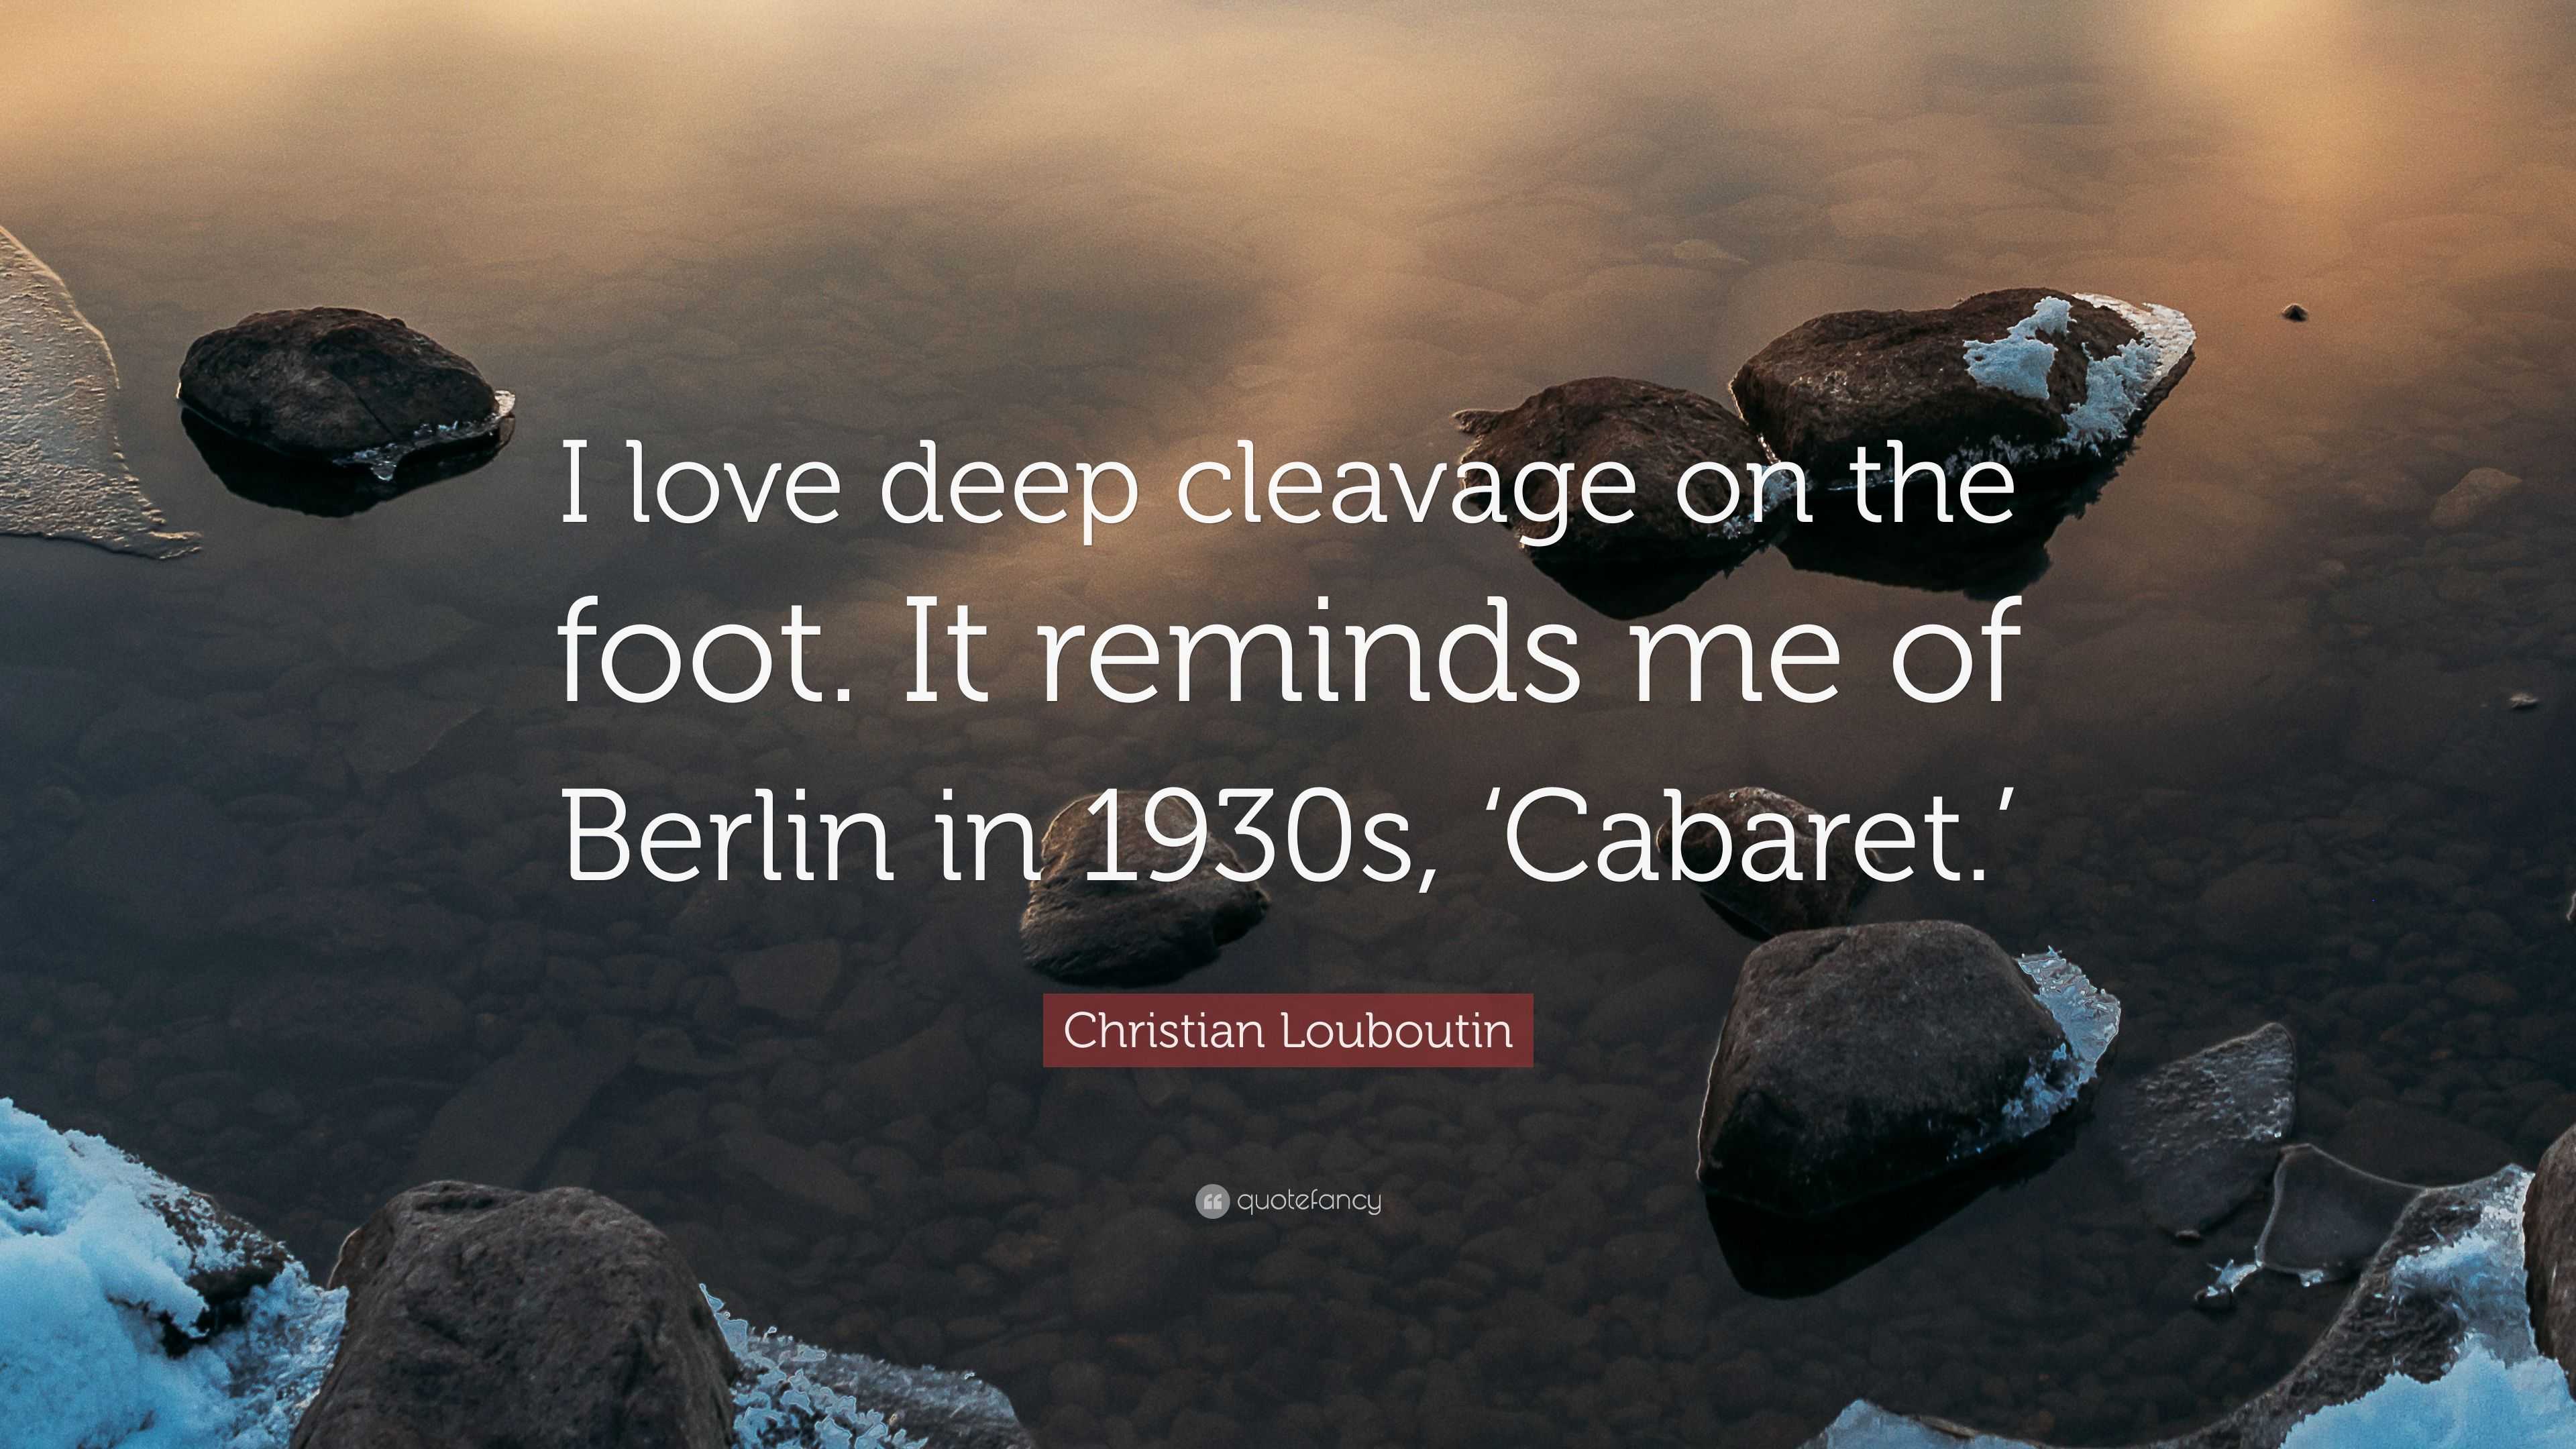 Christian Louboutin Quote: “I love deep cleavage on the foot. It reminds me  of Berlin in